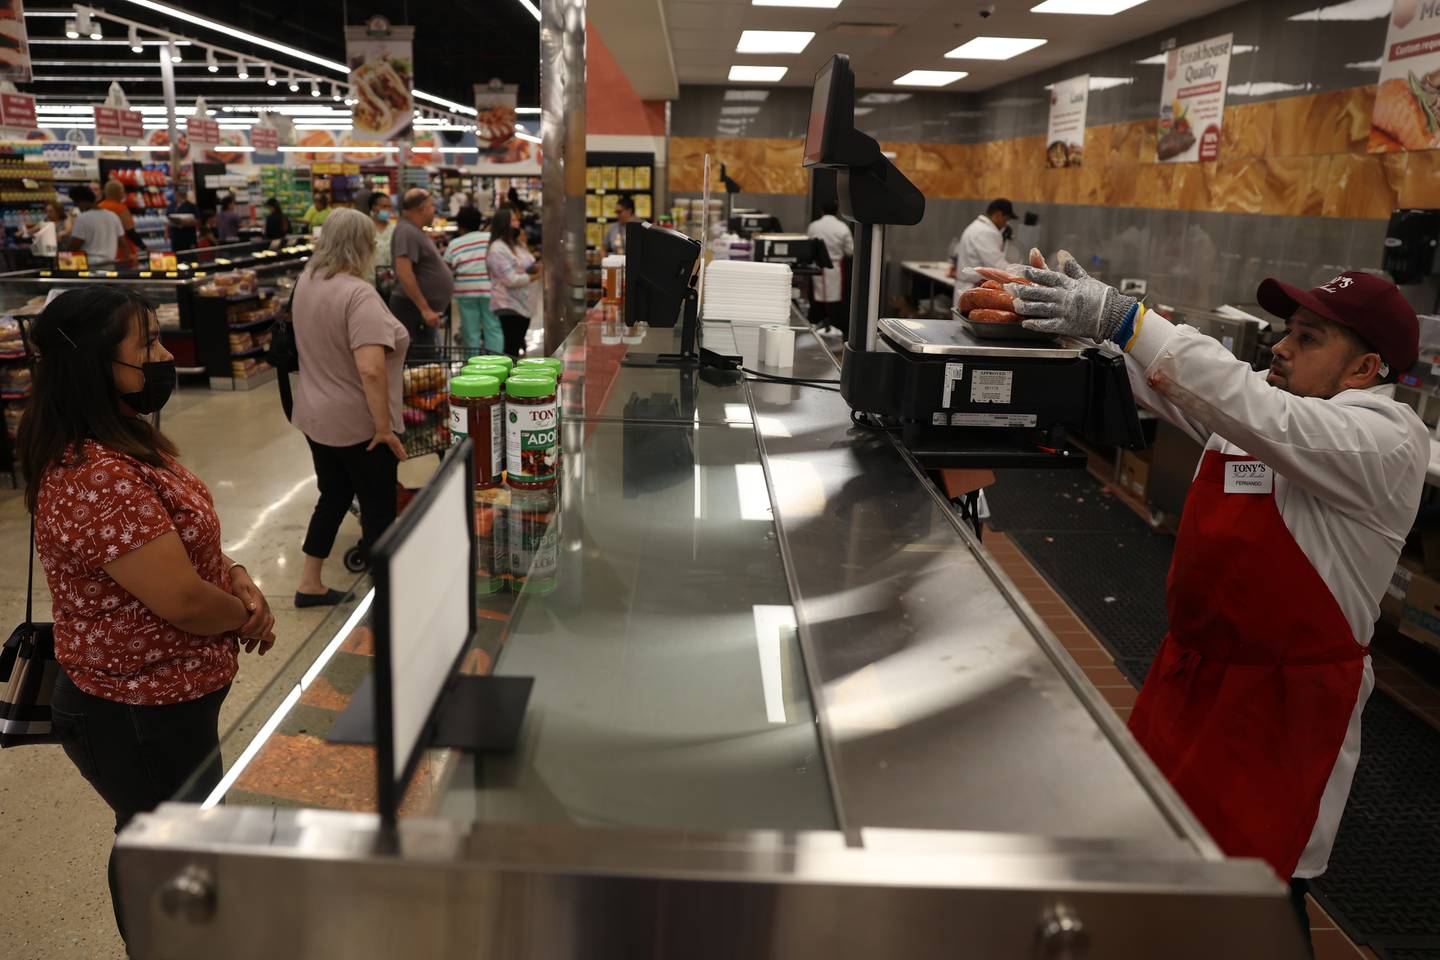 A worker weighs out some meat for a costumer at Tony’s Fresh Market grand opening in Joliet. Wednesday, June 28, 2022 in Joliet.